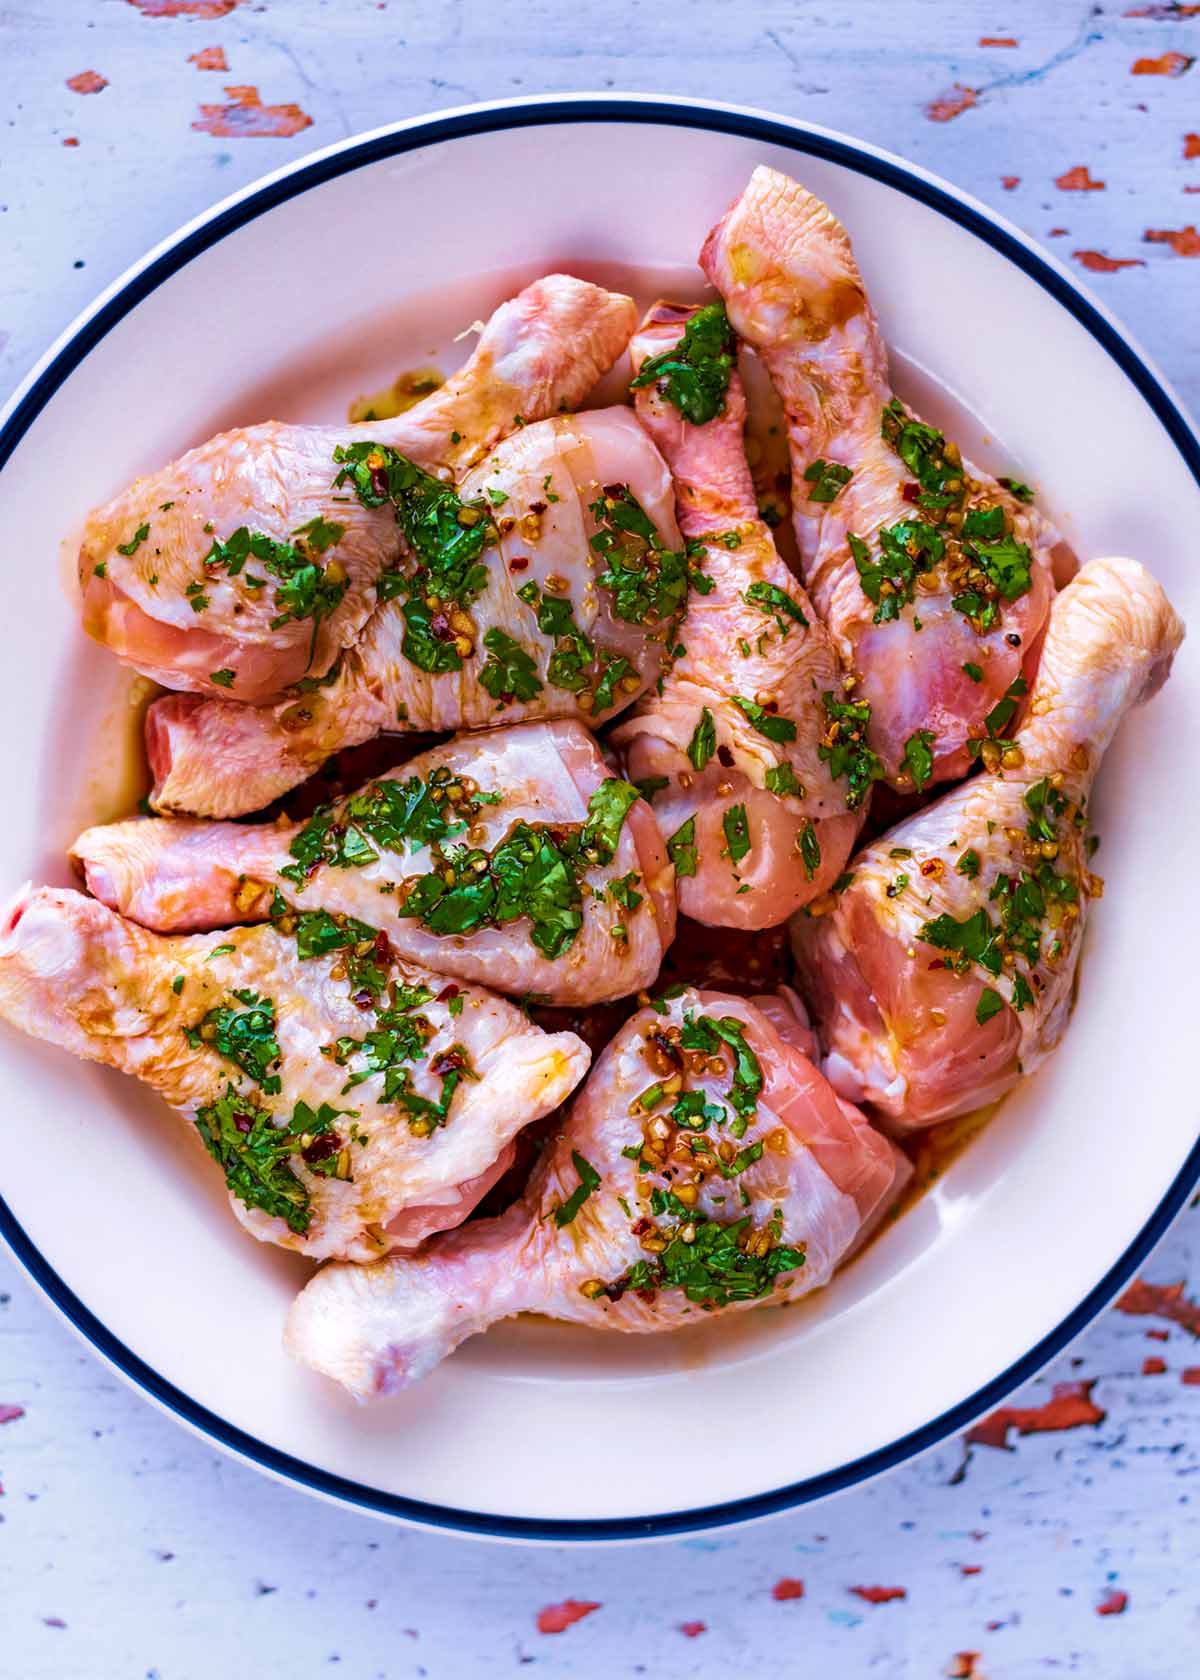 Chicken drumsticks coated in a herb marinade.